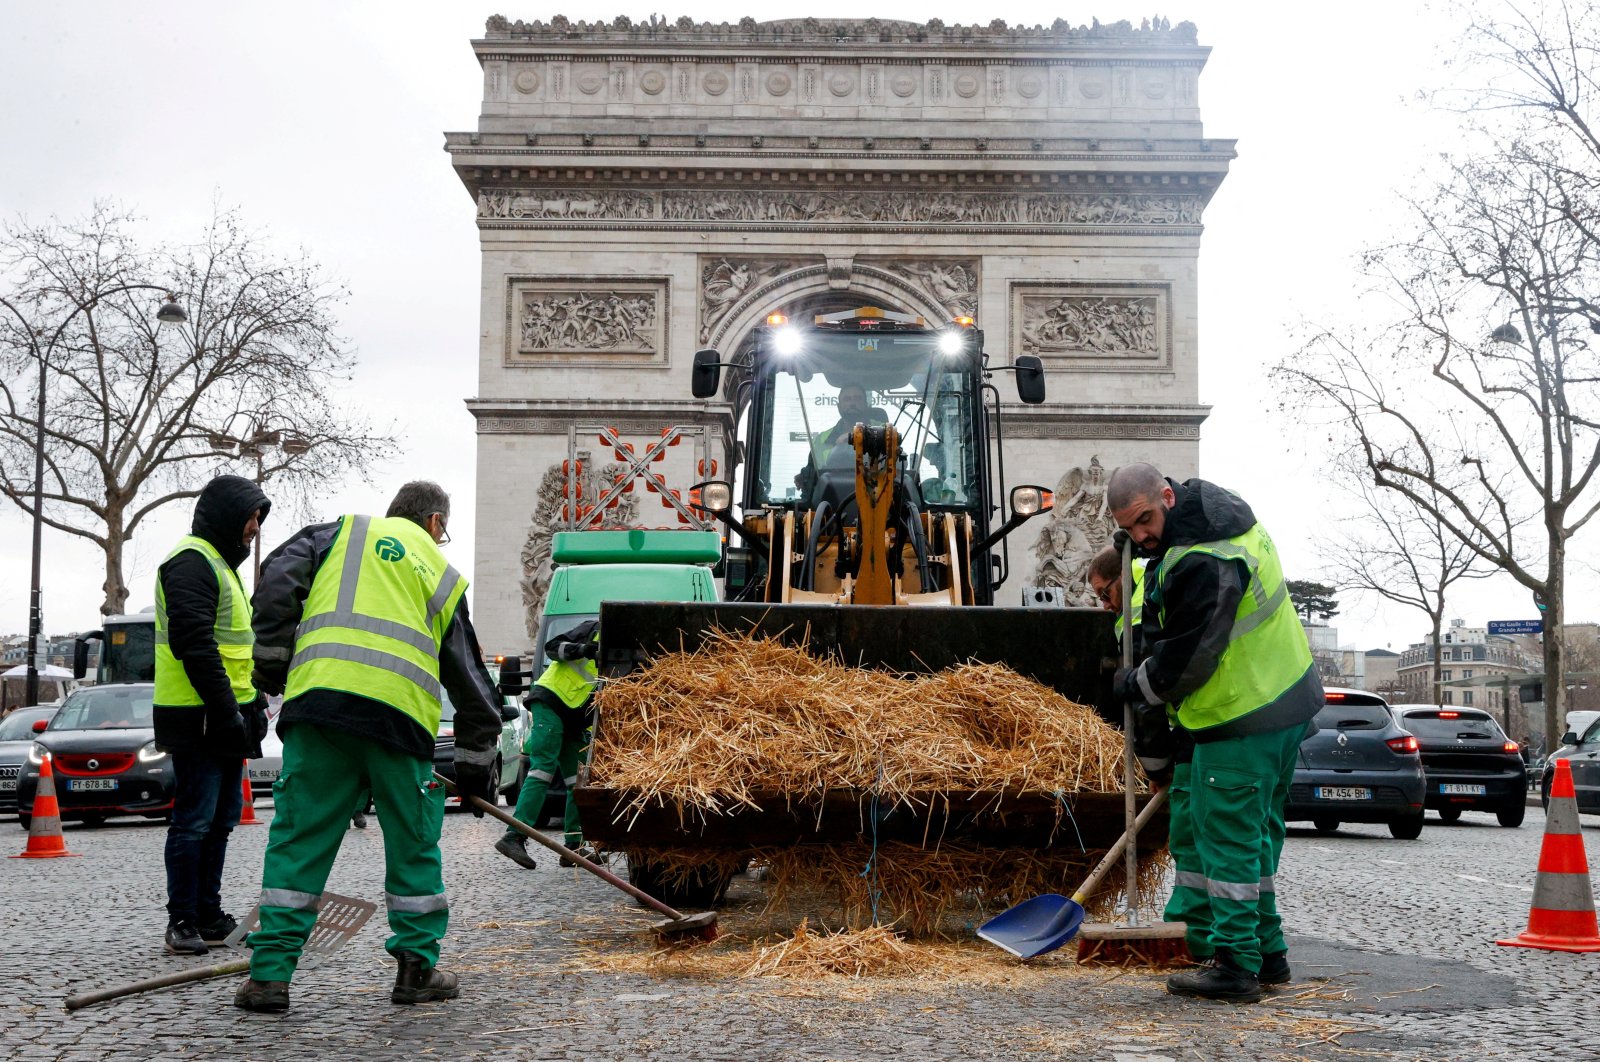 Municipal workers sweep up straw during a protest by farmers over price pressures, taxes and green regulation, grievances shared by farmers across Europe, Paris, France, Feb. 1, 2024. (Reuters Photo)